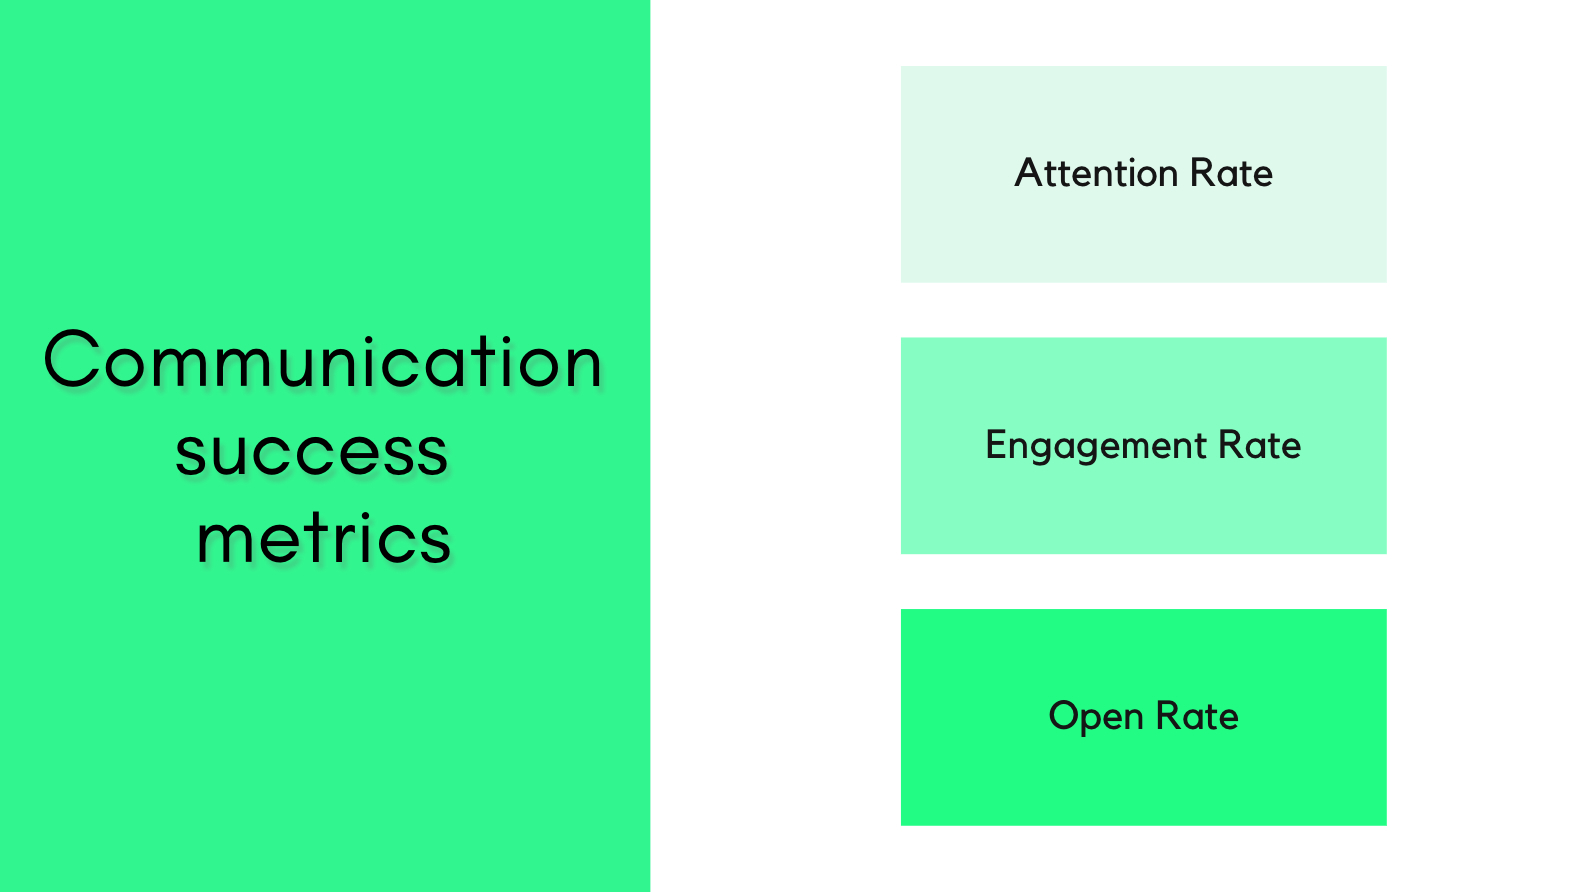 OCMS Portal - Attention, Engagement, and Open rate metrics